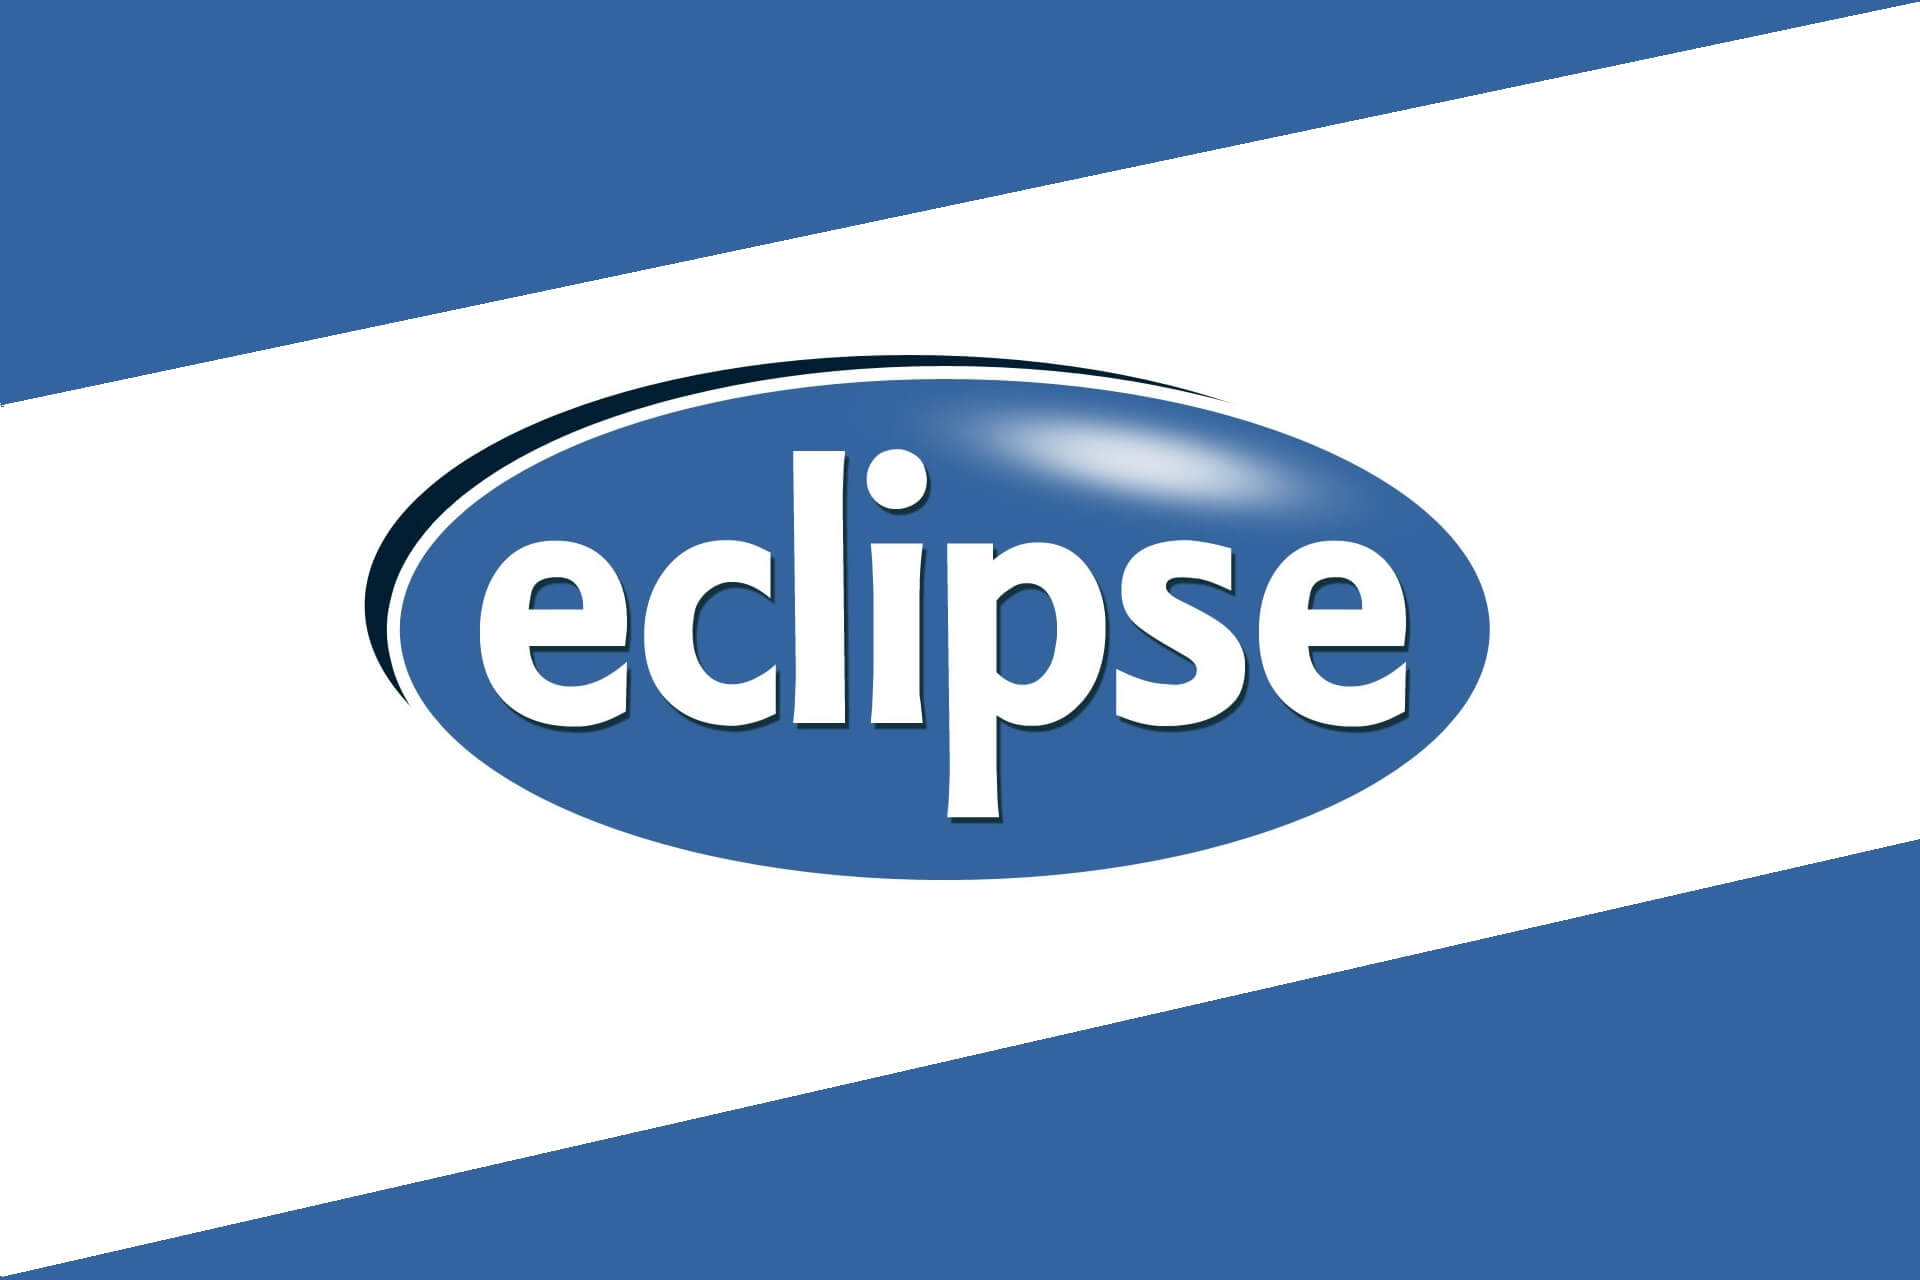 stop motion pro eclipse free download full version